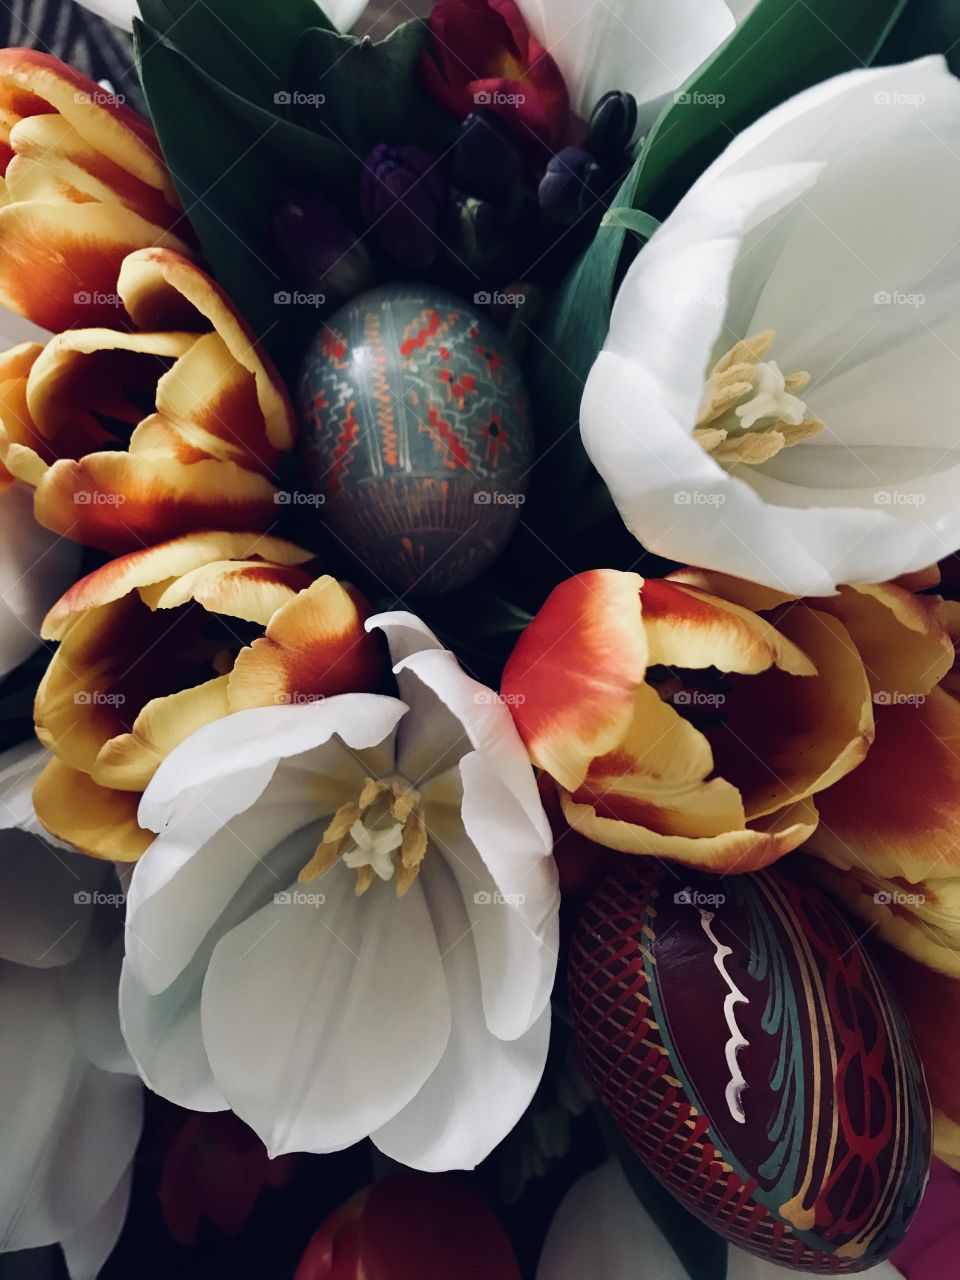 Eggs and flowers 